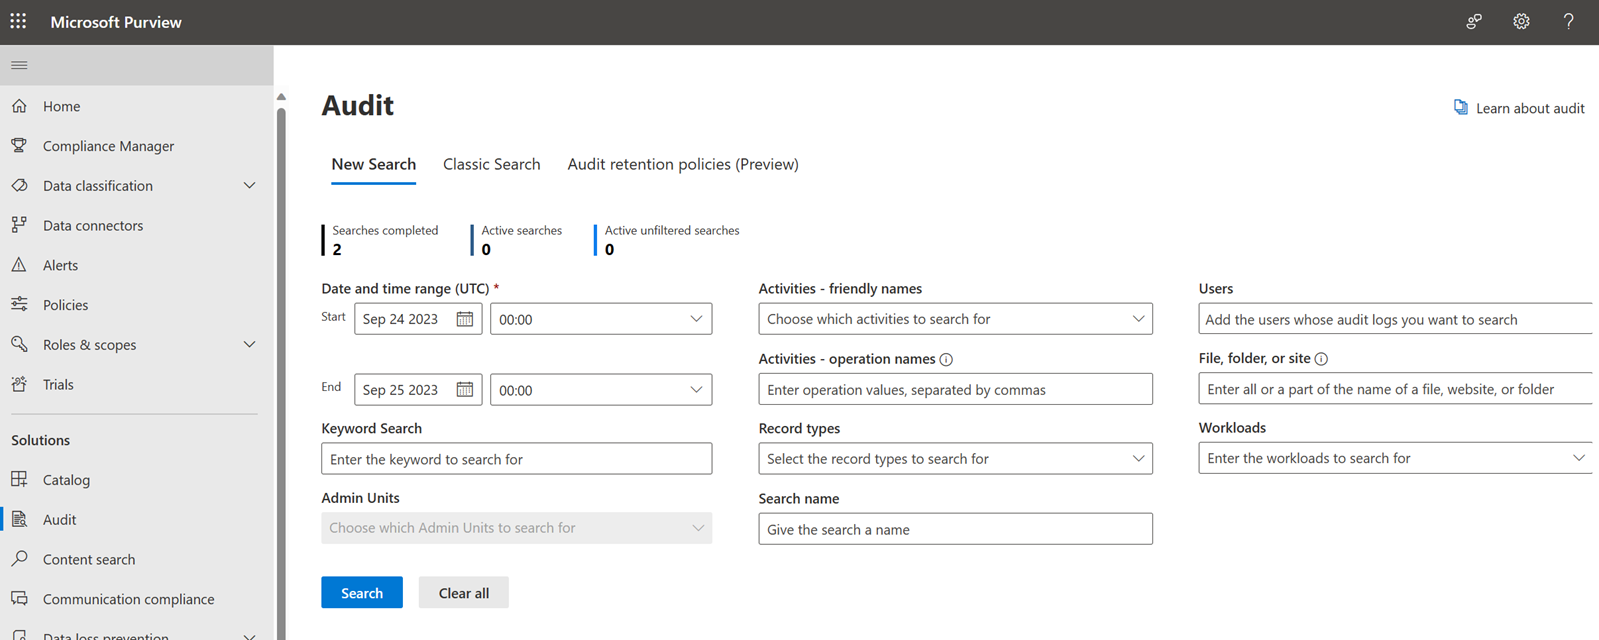 Microsoft Purview search audit page